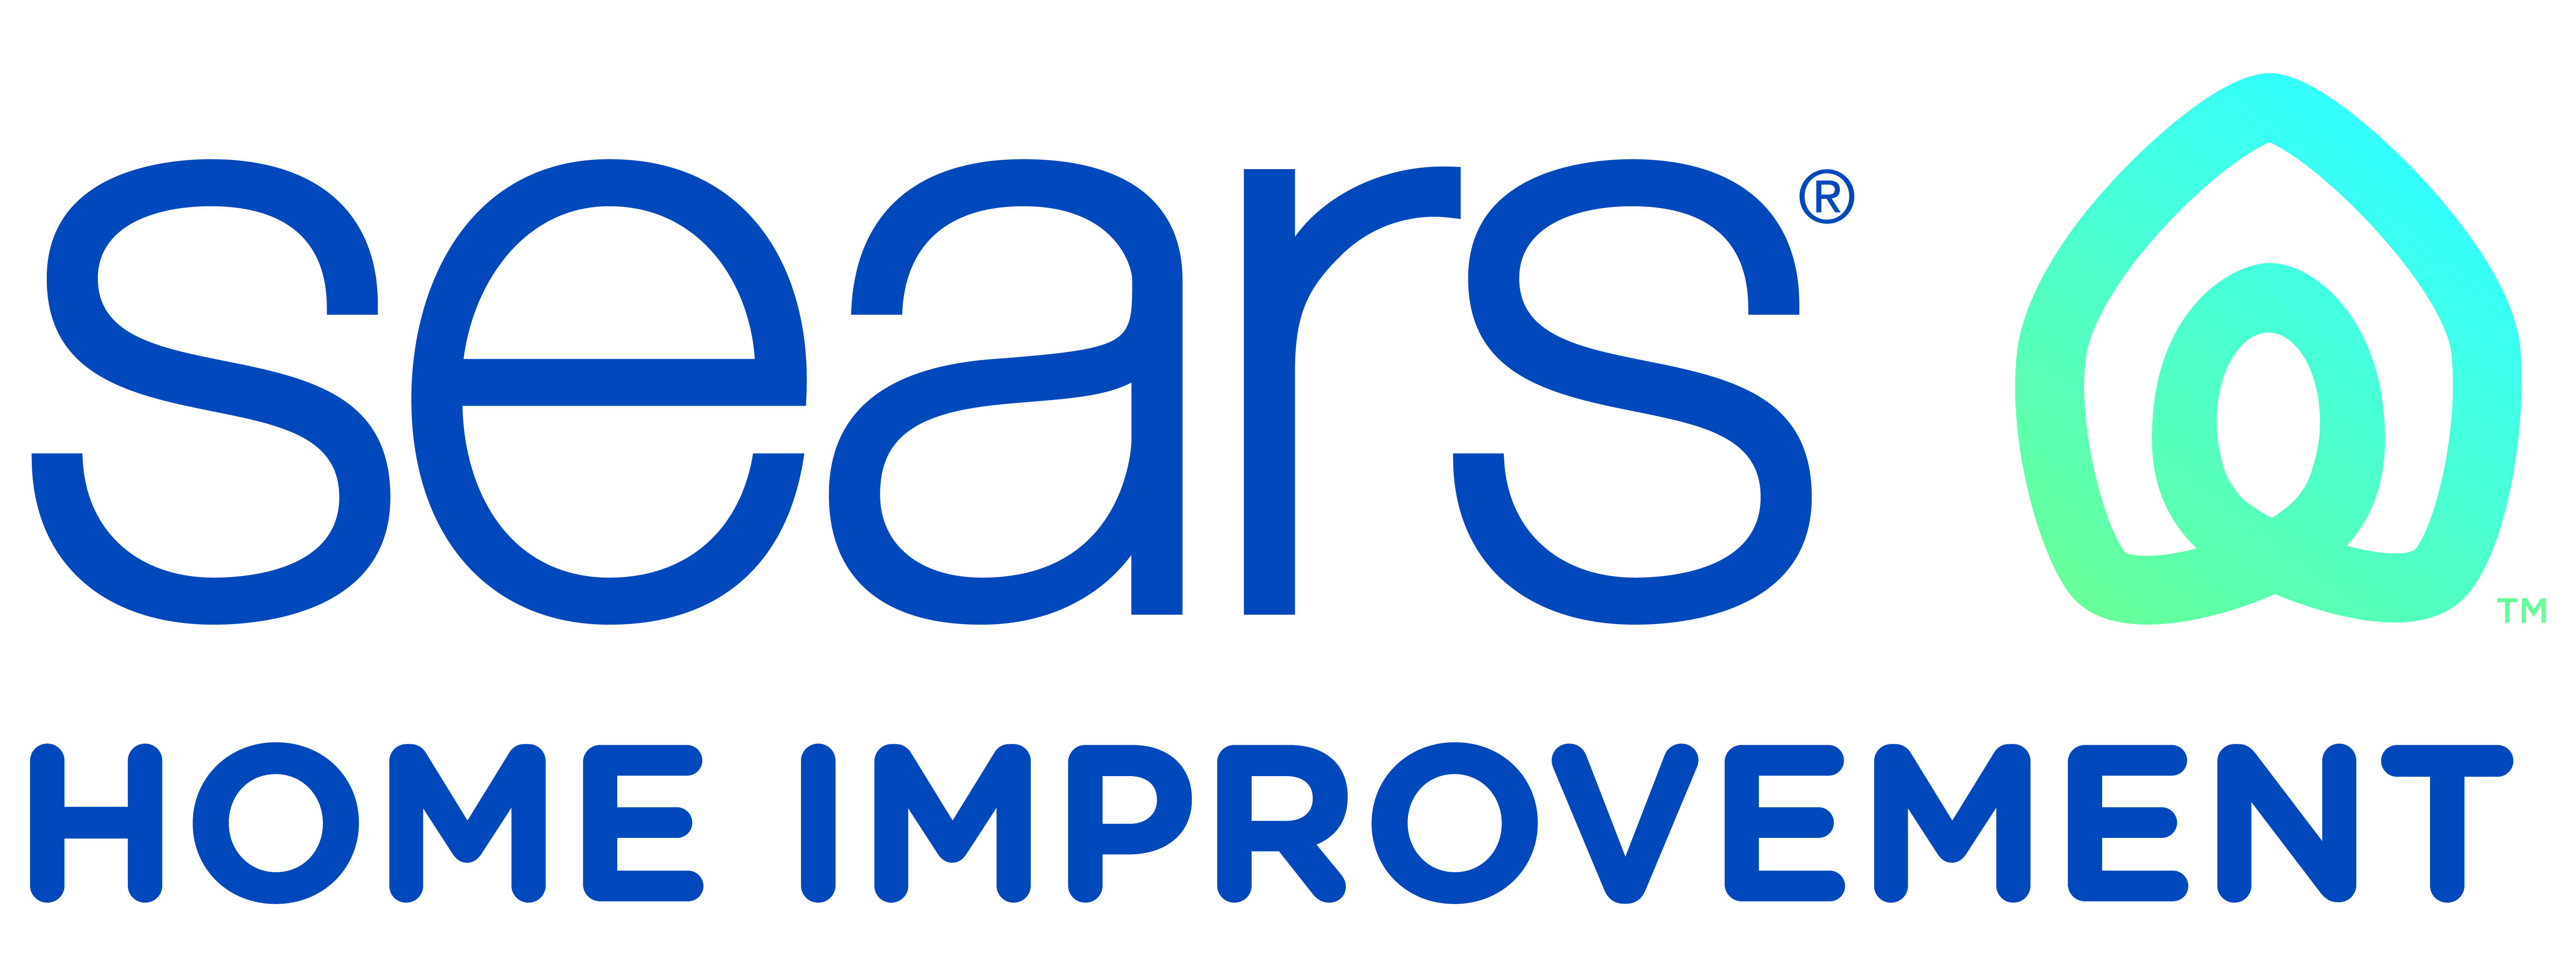 Sears Home Services - Heating and Cooling Logo